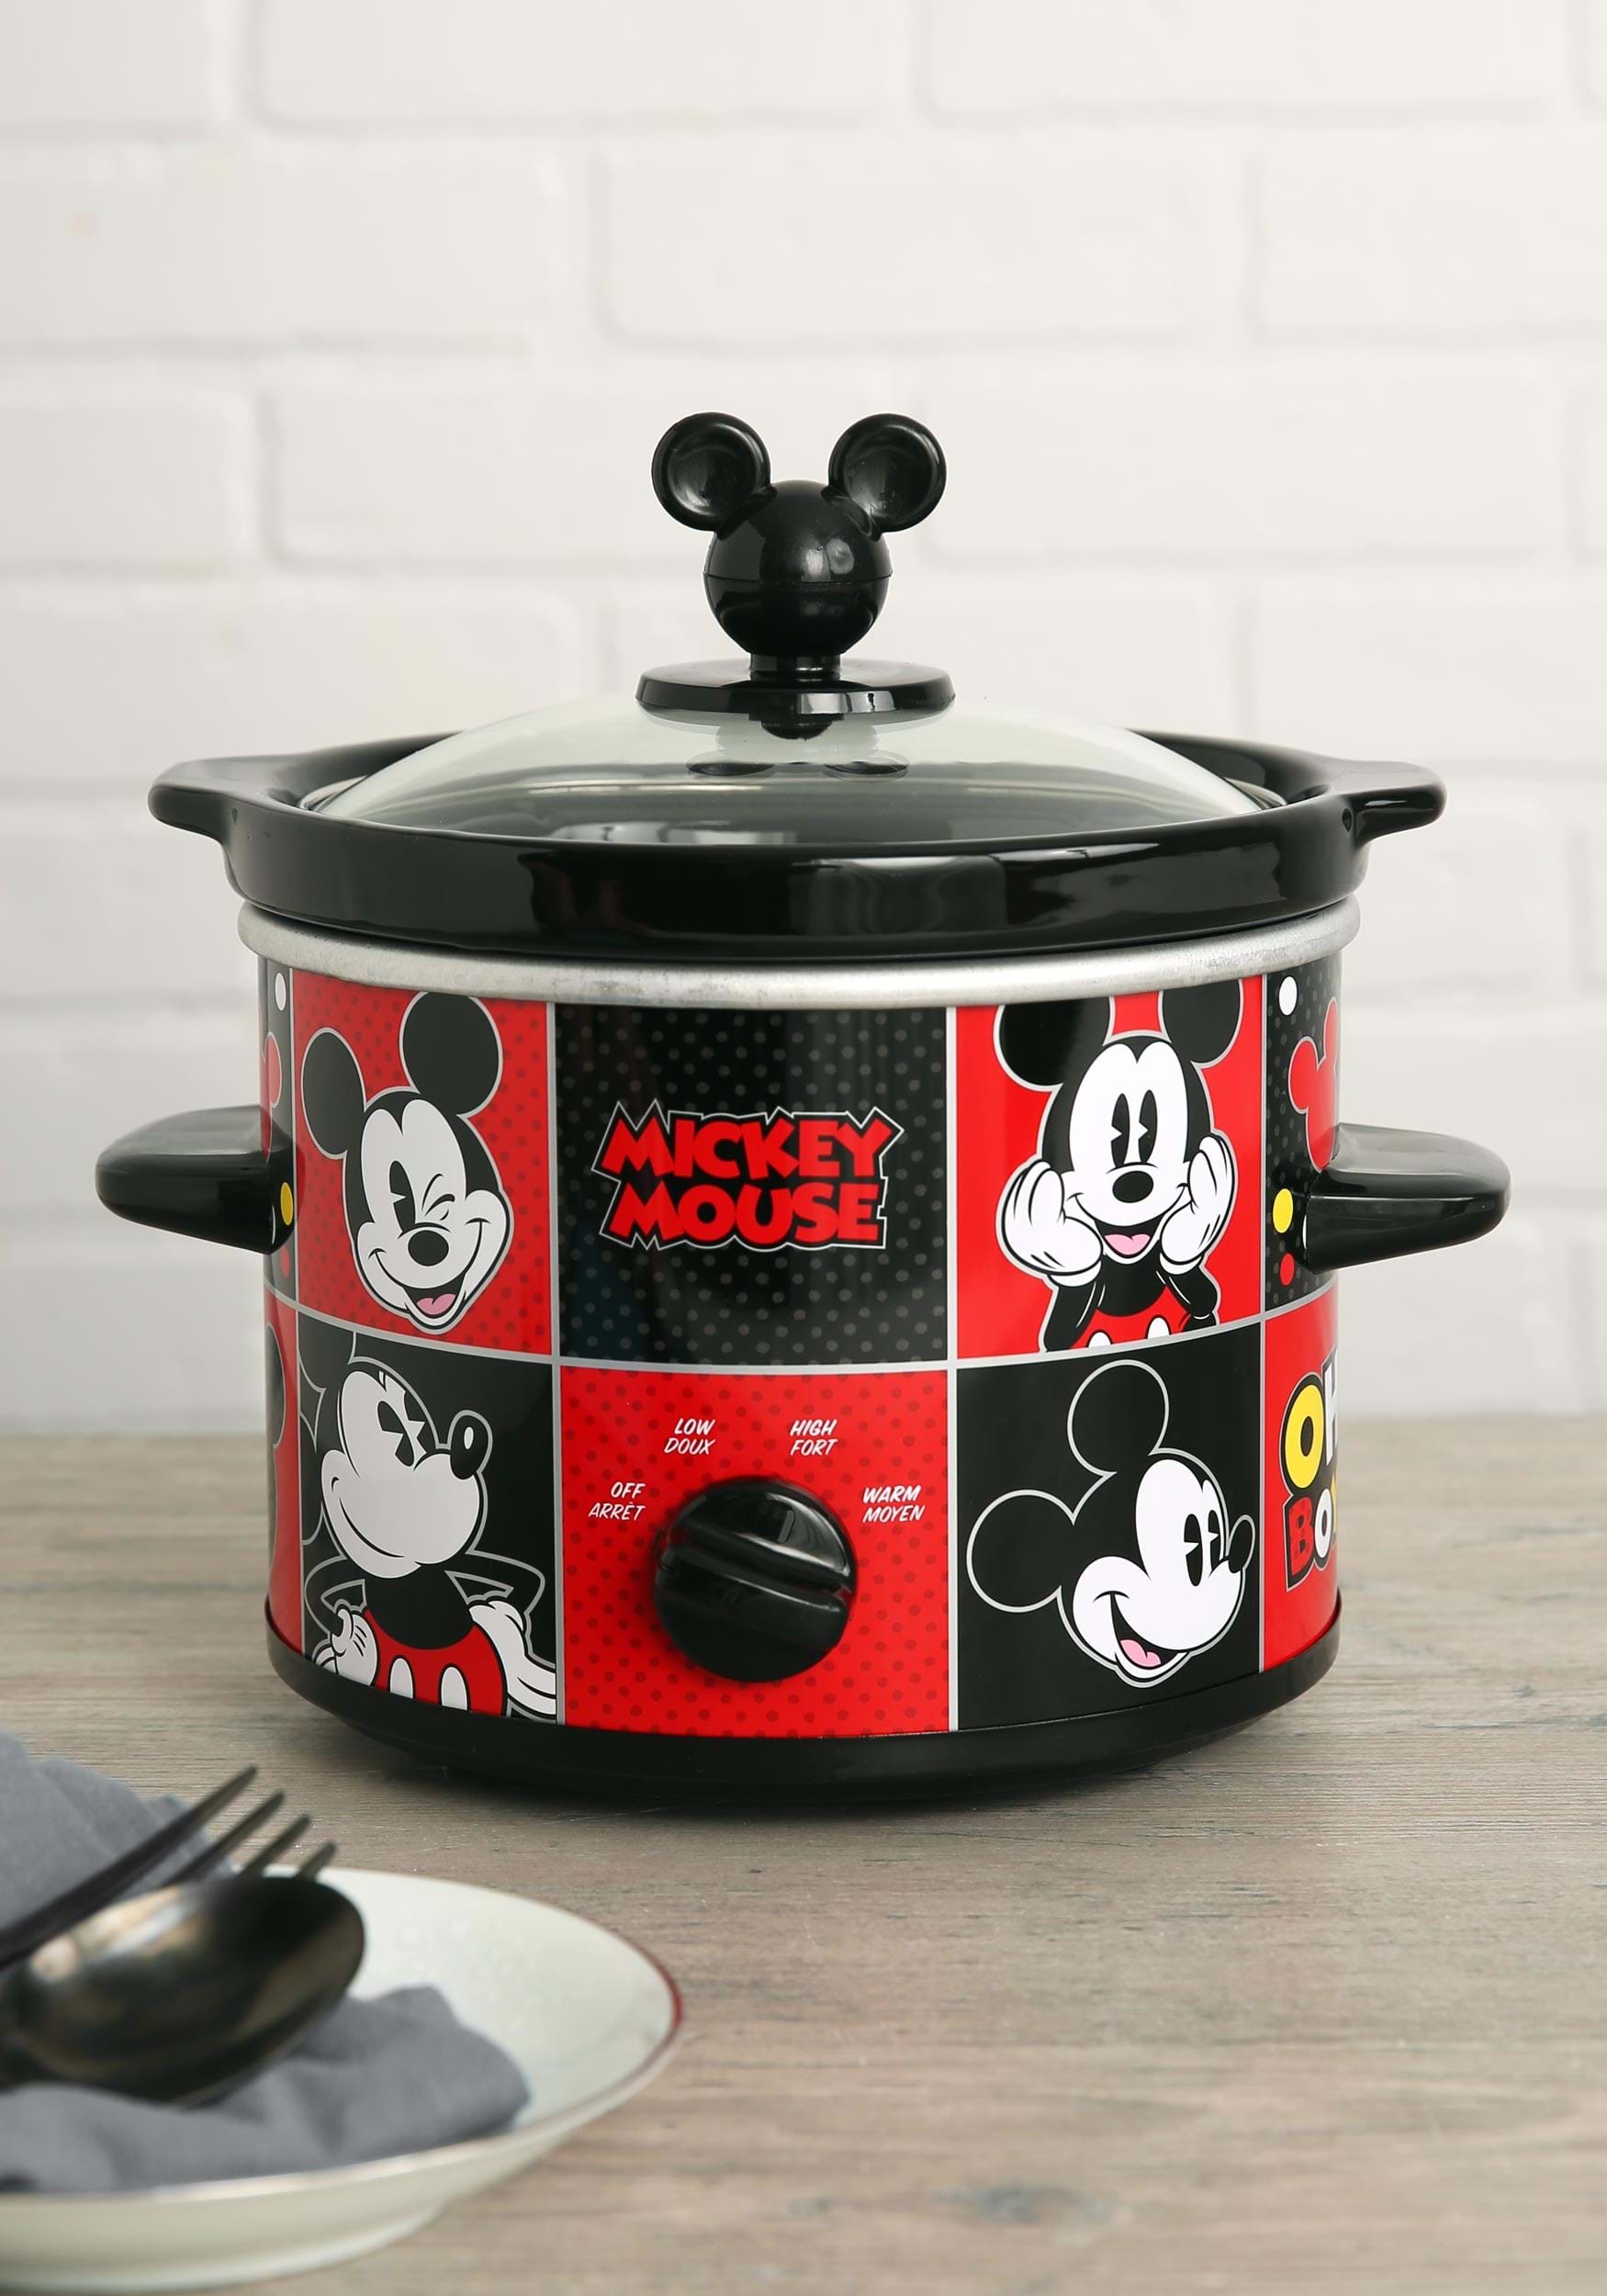 https://images.fun.com/products/49758/1-1/mickey-mouse-2qt-slow-cooker-update.jpg